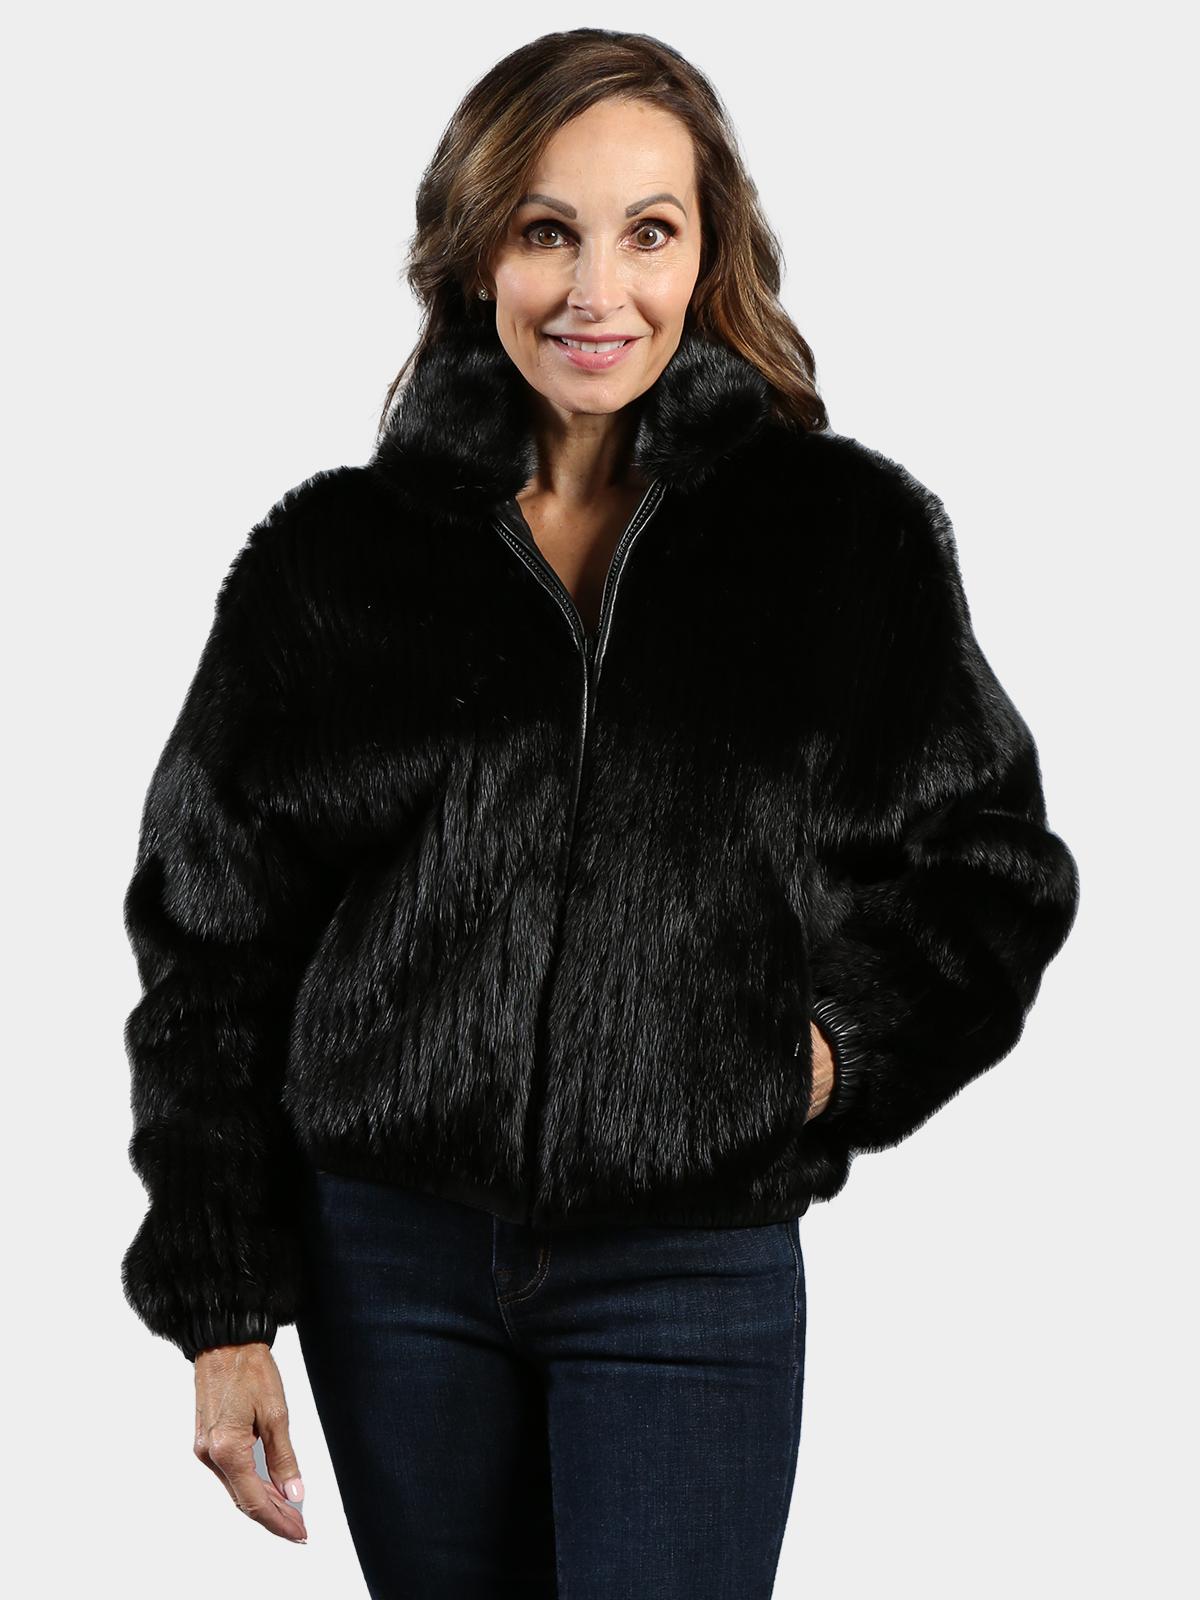 Woman's Ranch Mink Cord Cut Jacket Reversing to Black Leather